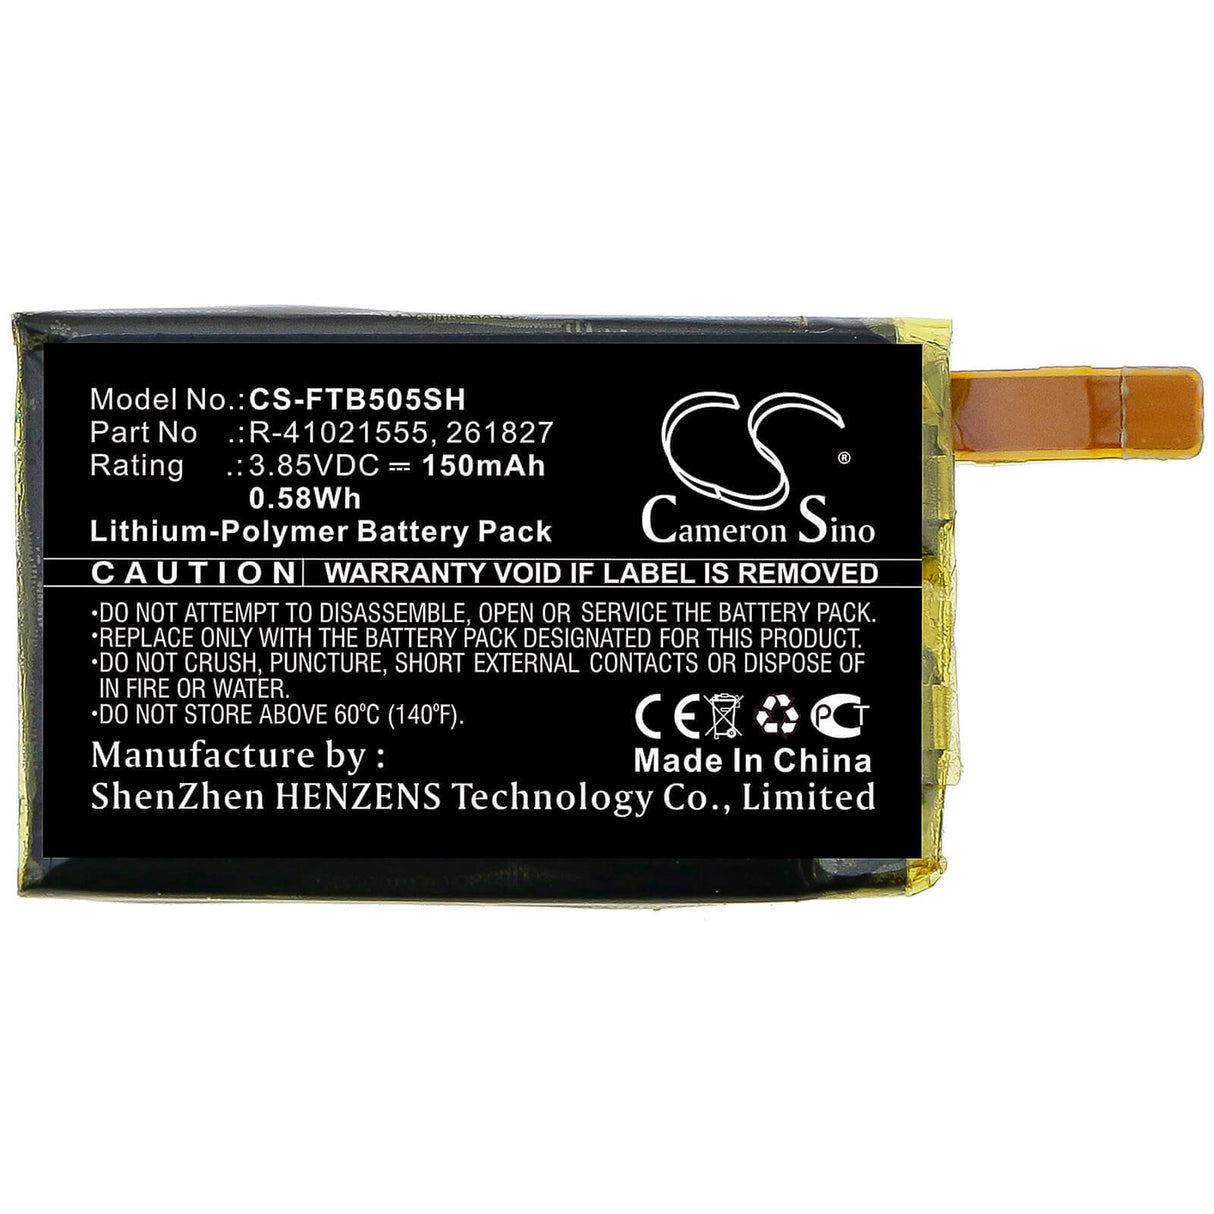 Battery For Fitbit, Fb504, Fb505, Versa 3.85v, 150mah - 0.58wh Batteries for Electronics Cameron Sino Technology Limited   